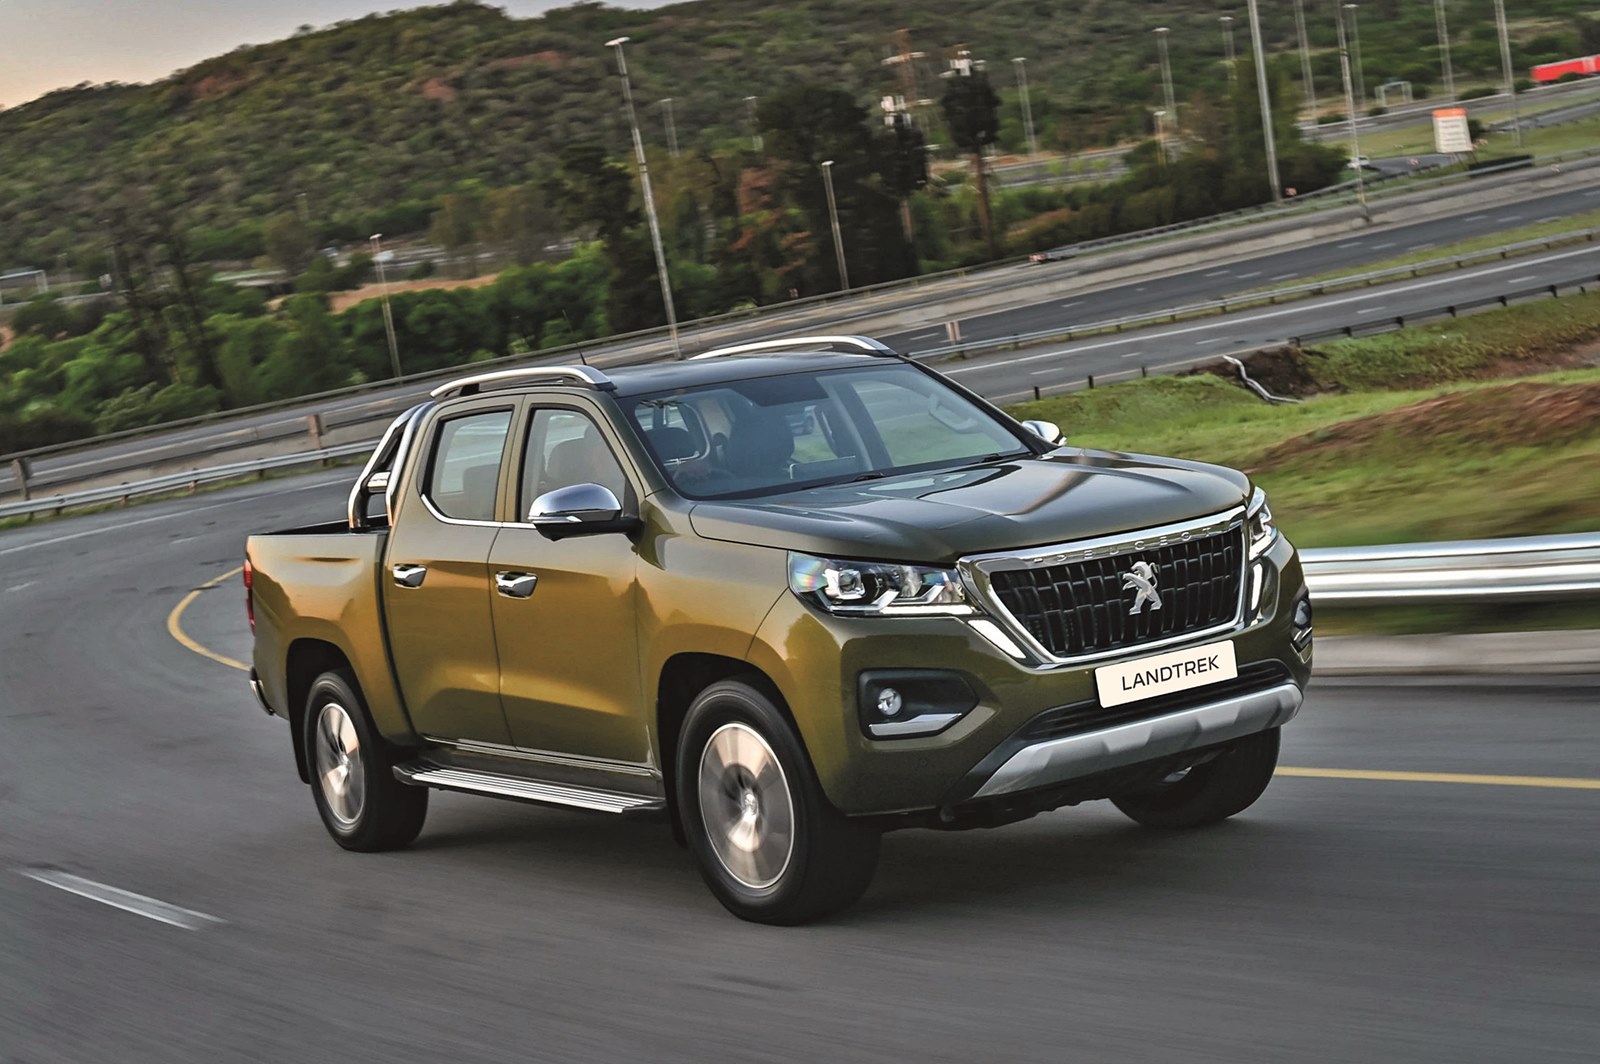 malaysia is first market in asia-pacific to sell peugeot landtrek pick-up truck